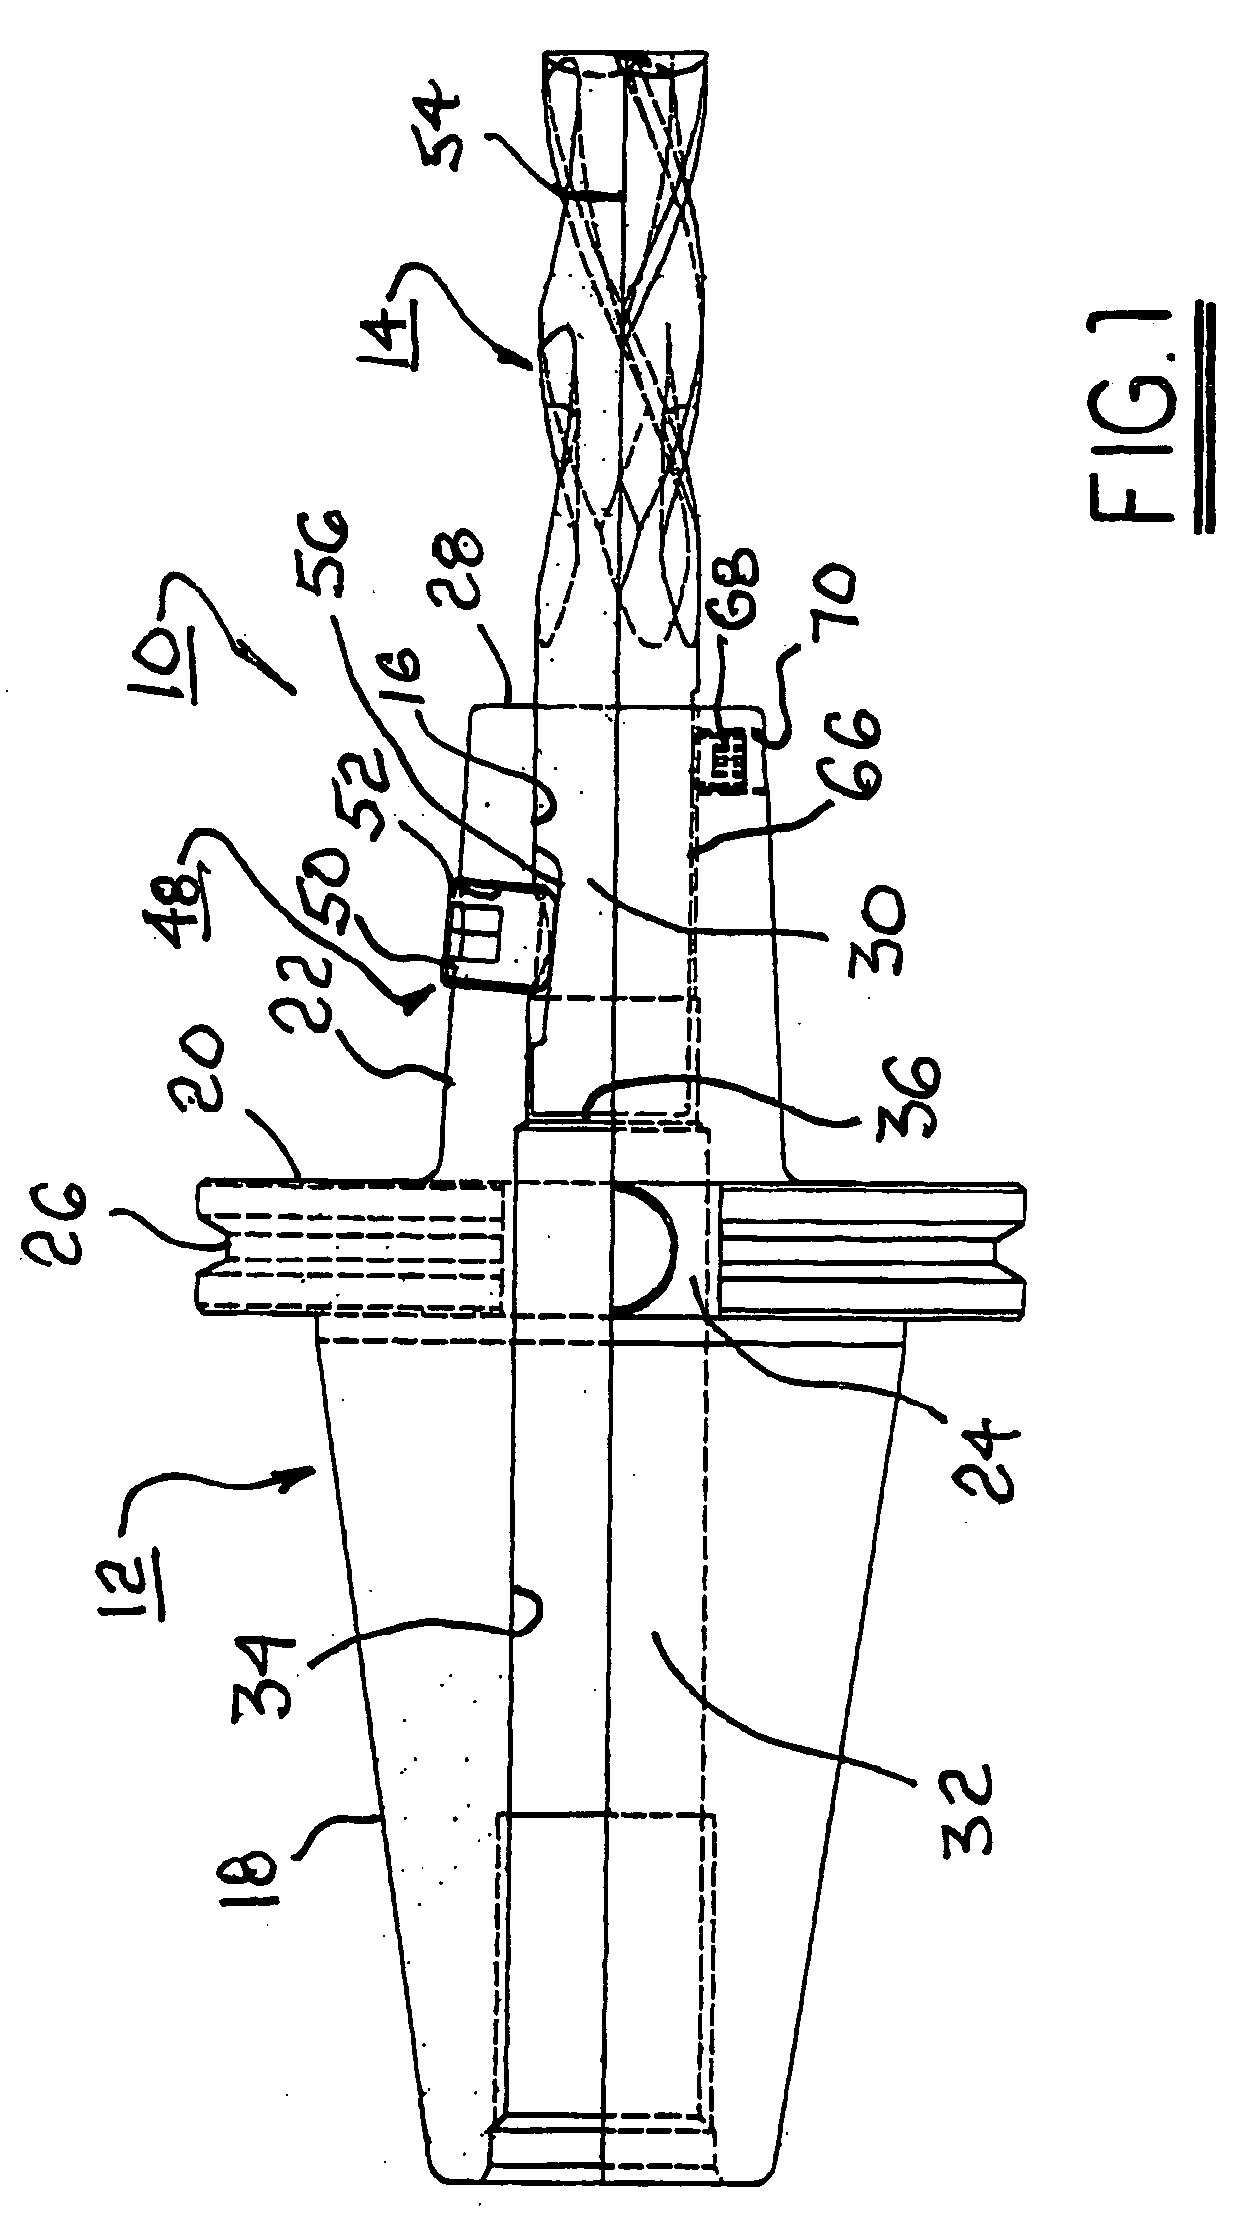 System for mounting a machine tool in a tool holder